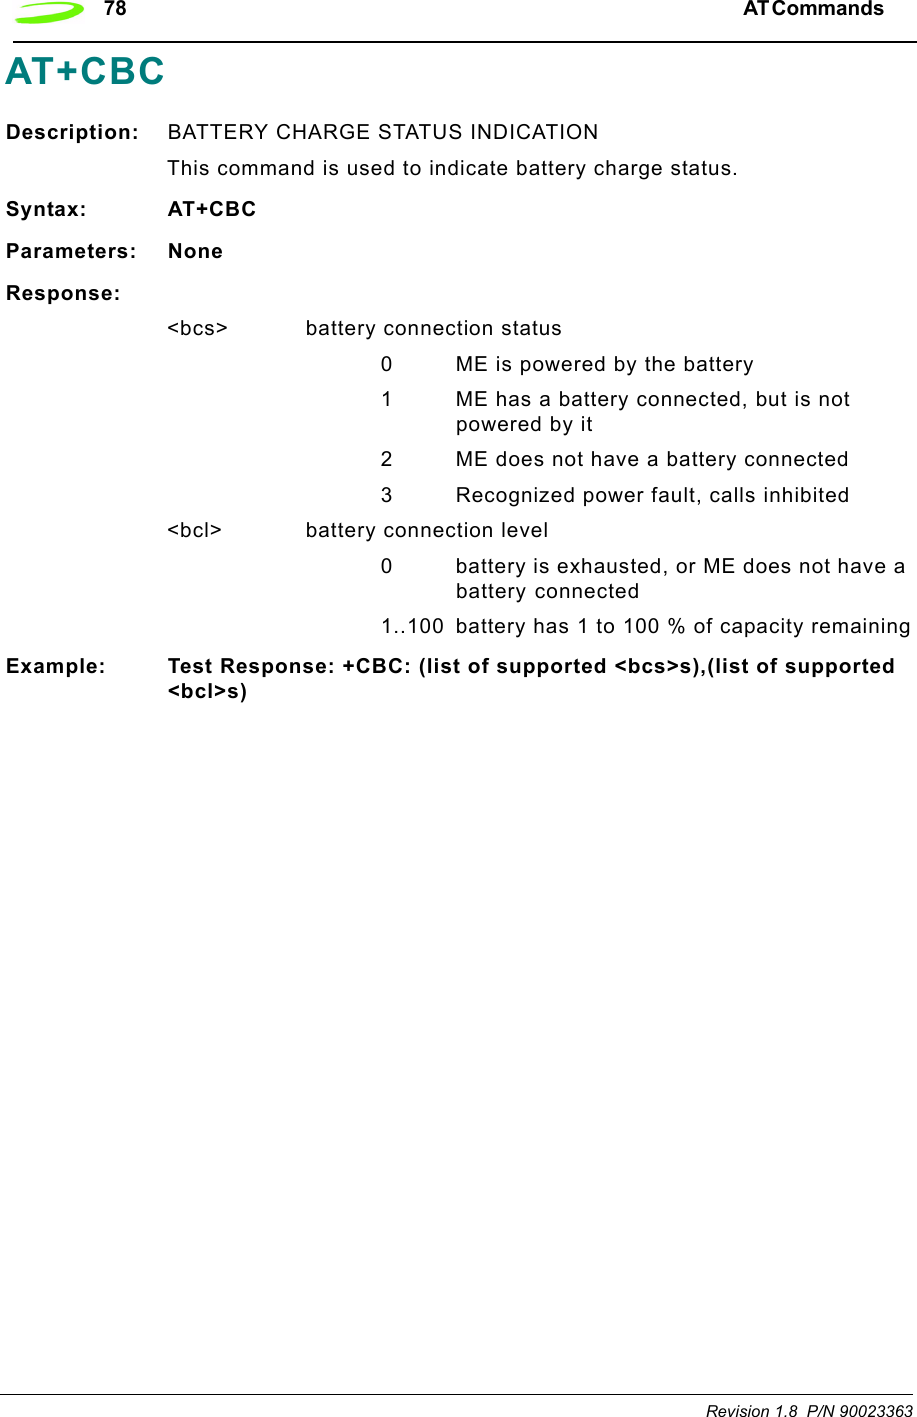 78 AT Commands  Revision 1.8  P/N 90023363AT+CBCDescription: BATTERY CHARGE STATUS INDICATIONThis command is used to indicate battery charge status. Syntax: AT+CBCParameters: NoneResponse:&lt;bcs&gt; battery connection status0 ME is powered by the battery1 ME has a battery connected, but is not powered by it2 ME does not have a battery connected3 Recognized power fault, calls inhibited&lt;bcl&gt; battery connection level0 battery is exhausted, or ME does not have a battery connected 1..100 battery has 1 to 100 % of capacity remainingExample: Test Response: +CBC: (list of supported &lt;bcs&gt;s),(list of supported &lt;bcl&gt;s)